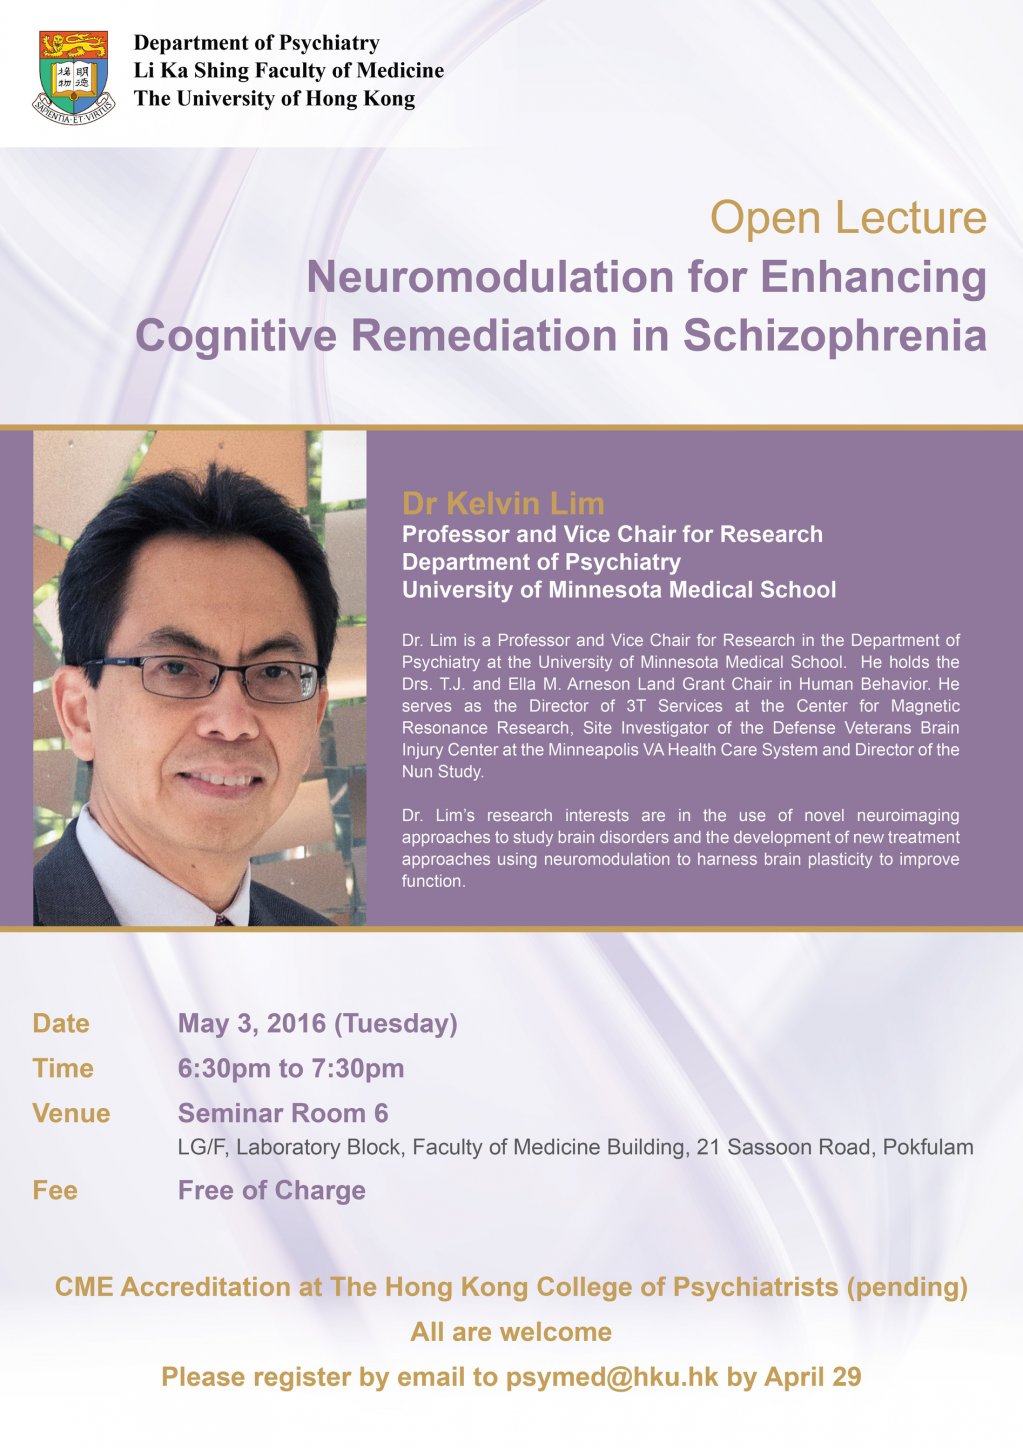 Public Lecture on May 3 by Dr Kelvin Lim (from University of Minnesota Medical School)